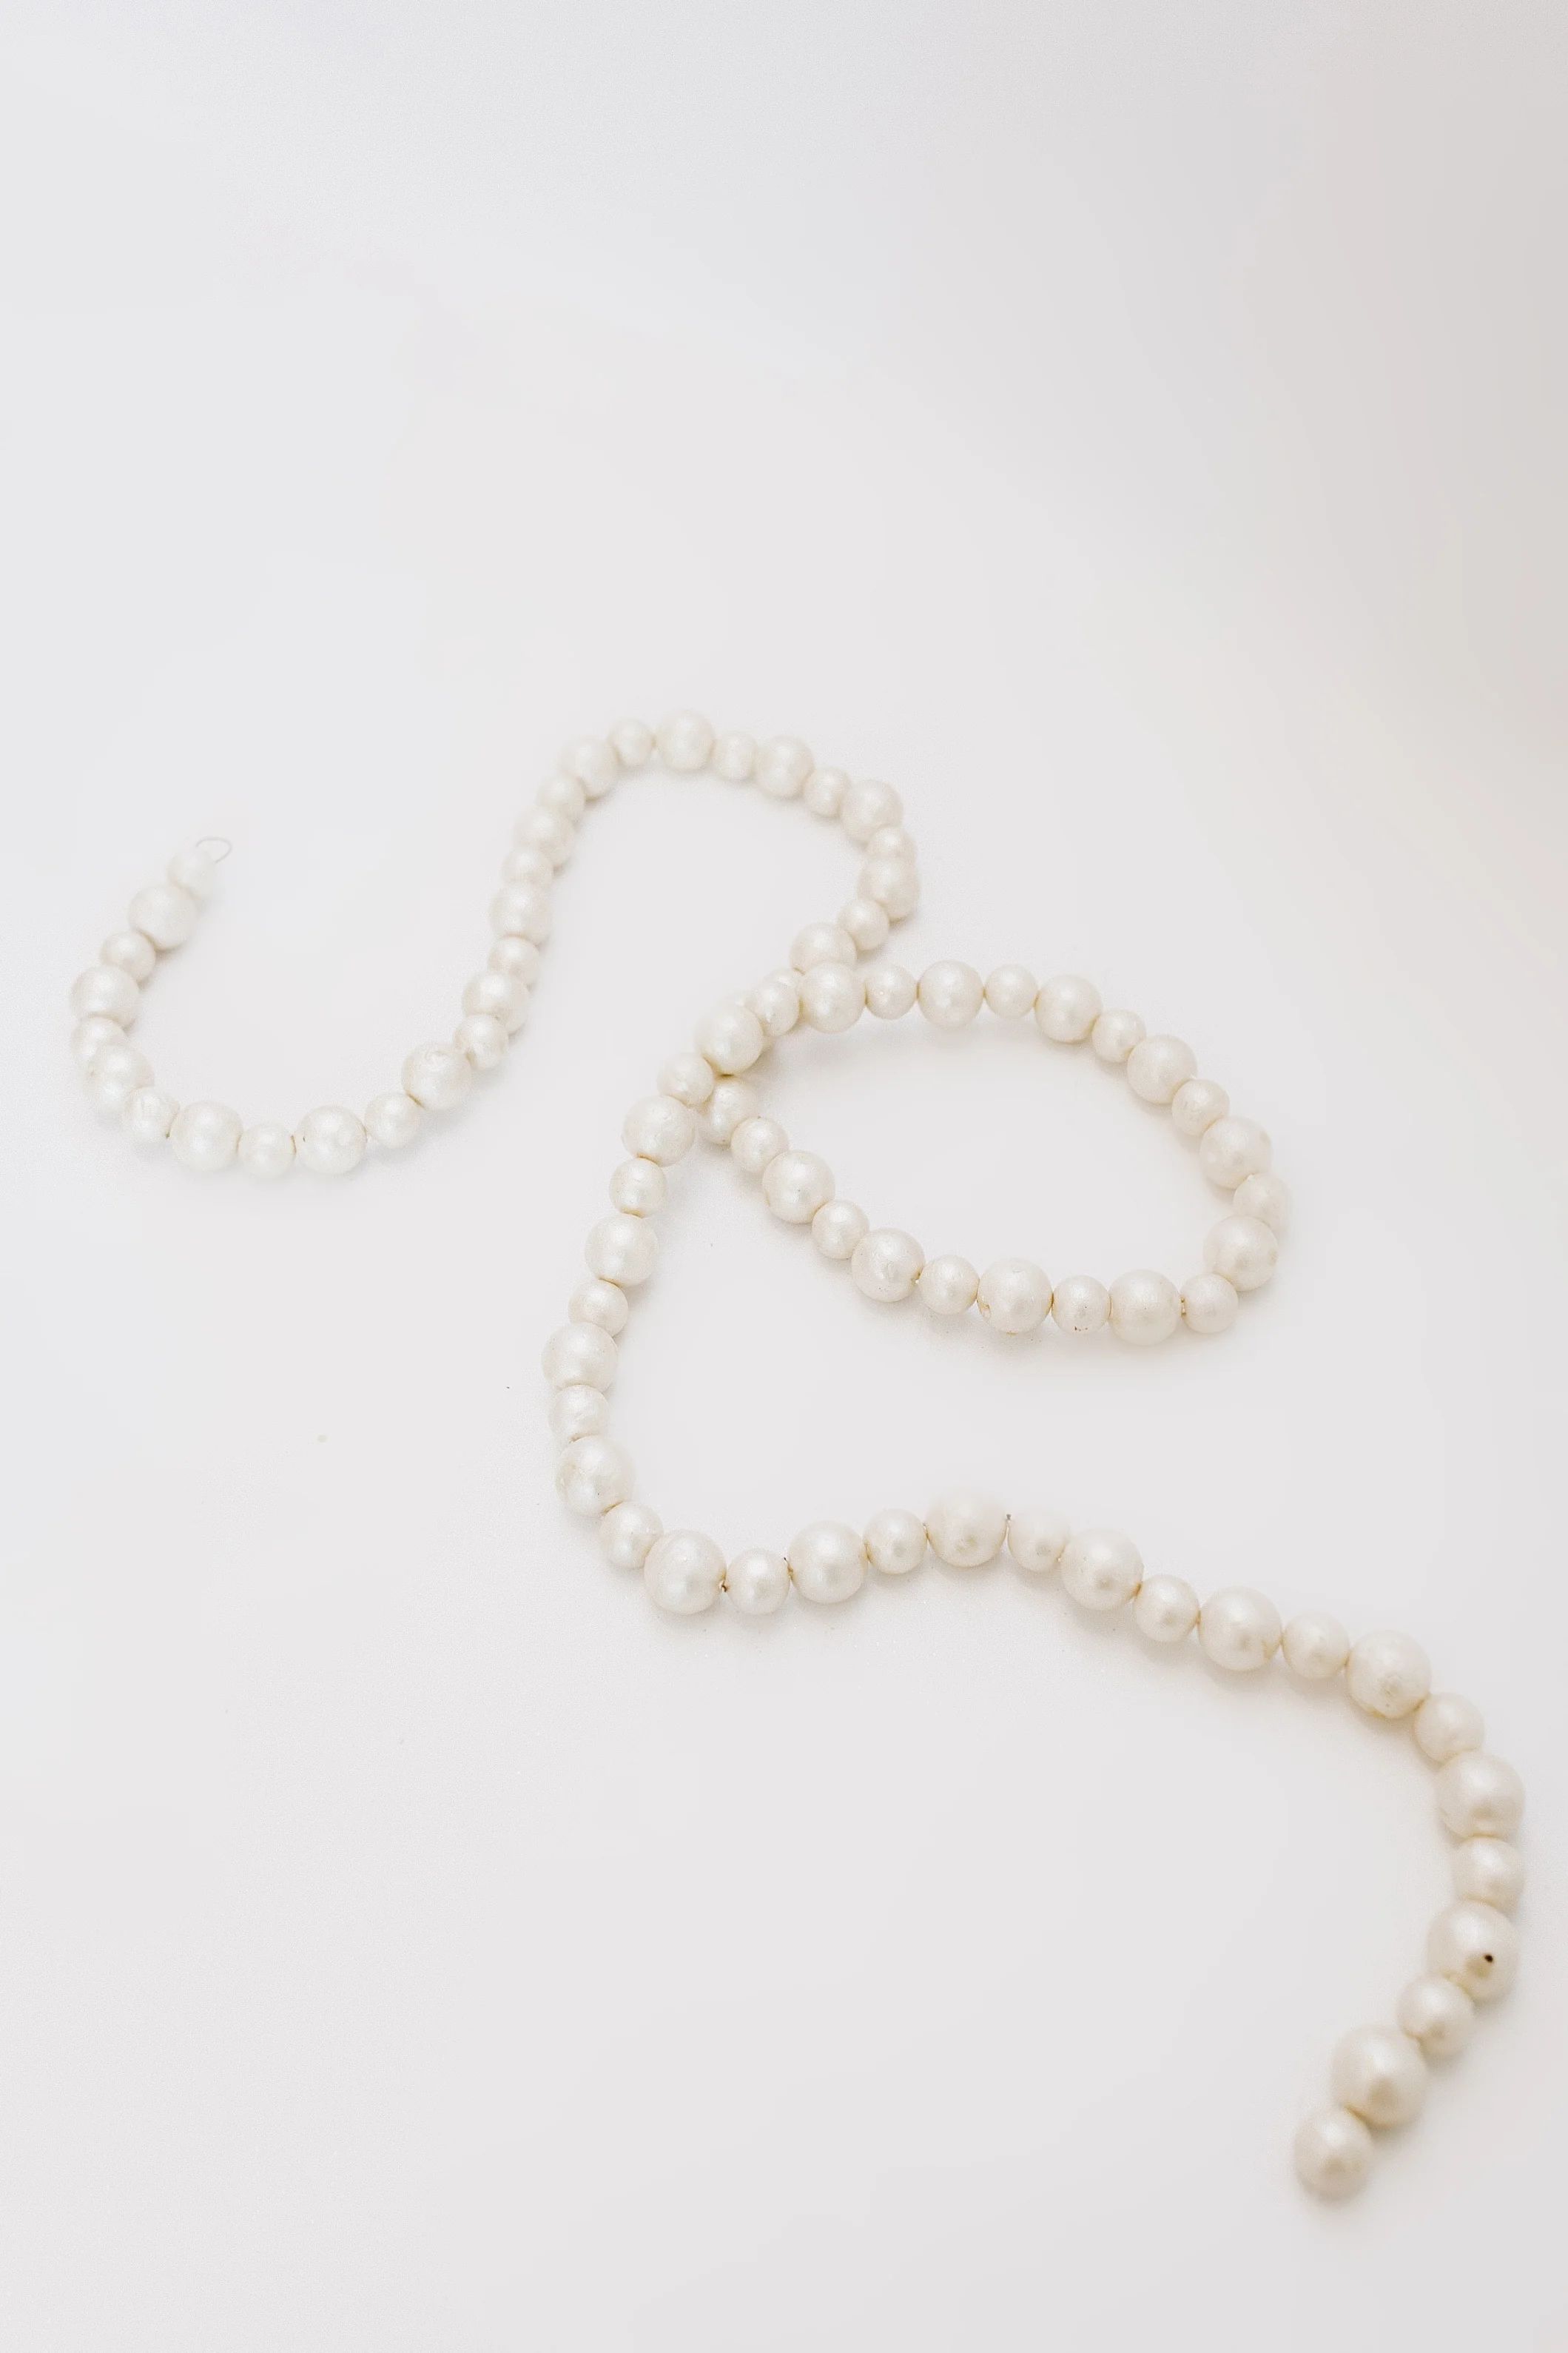 Muse Metallic Pearl Ball Garland - 6' | THELIFESTYLEDCO